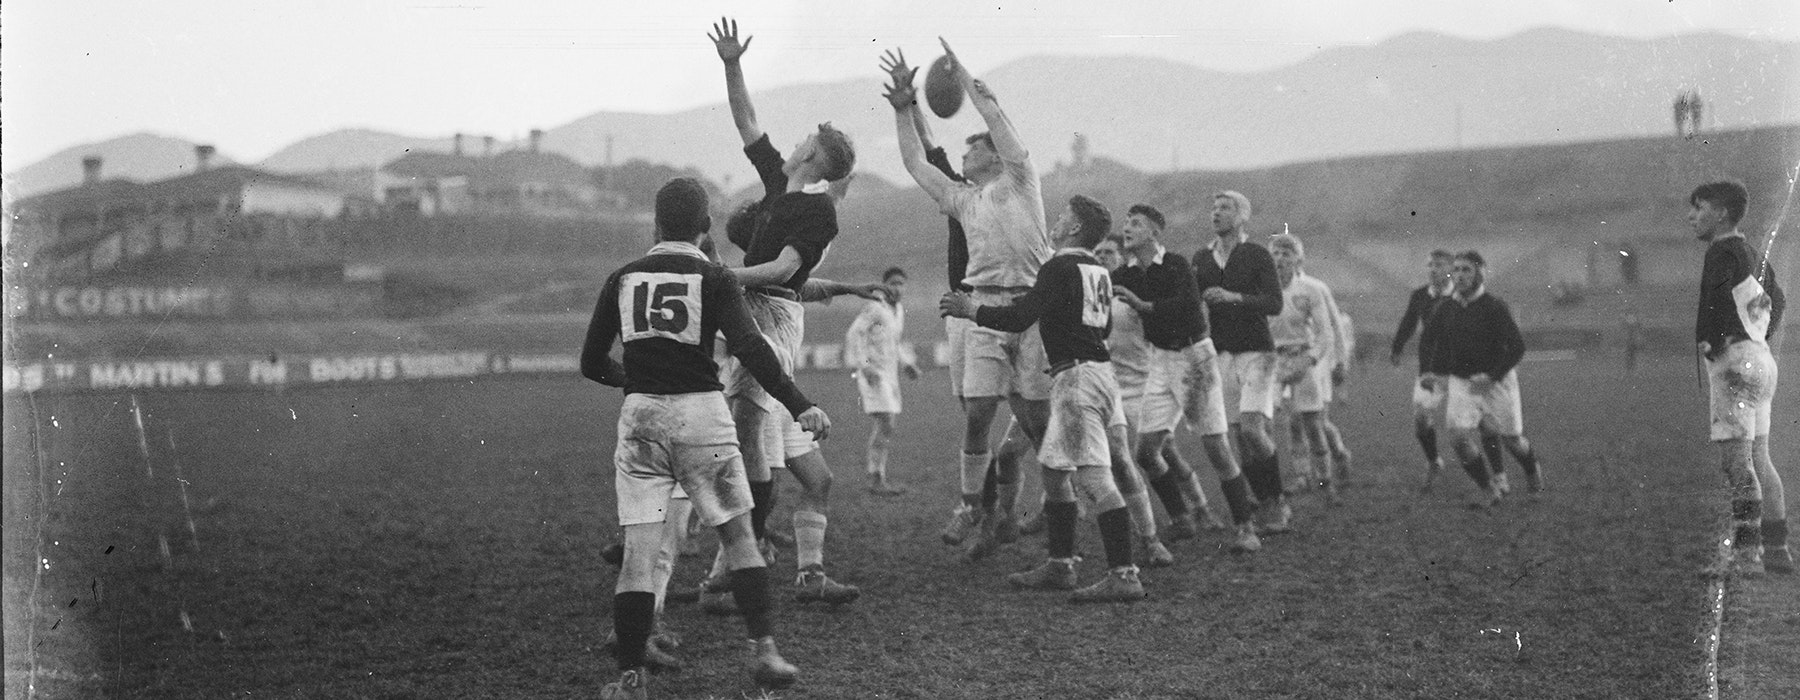 A black and white photo of two teams playing rugby